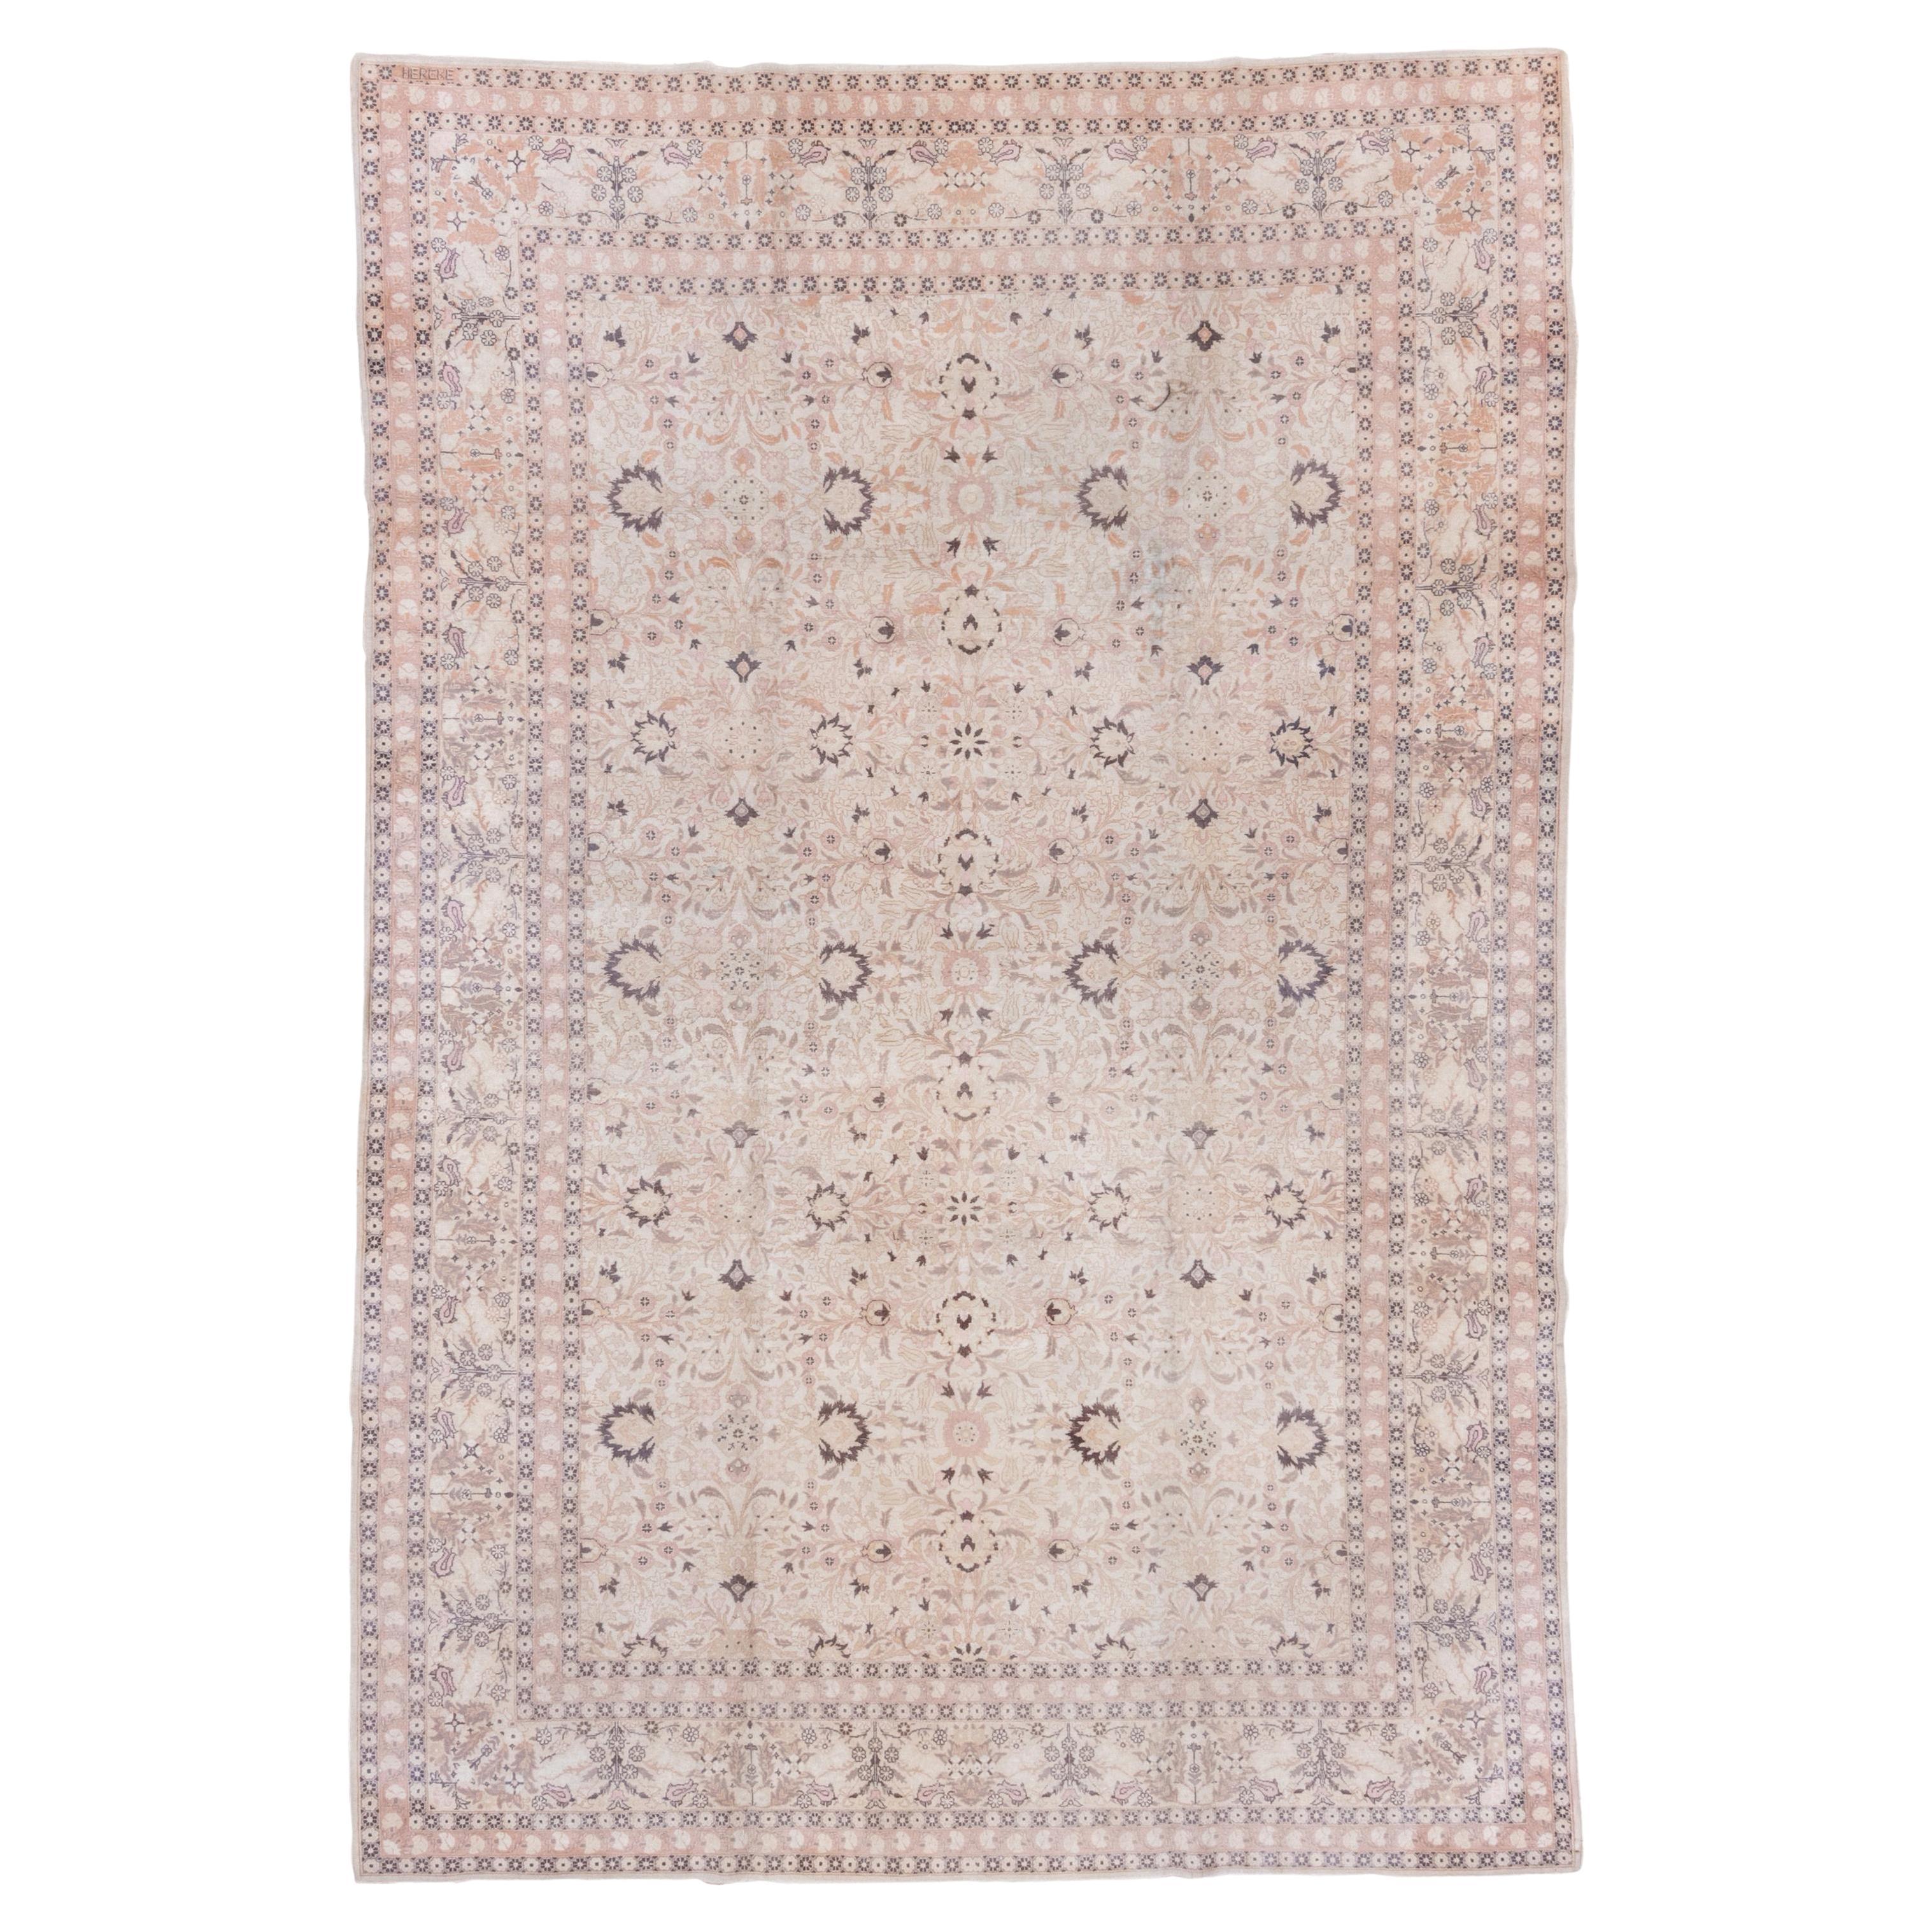 Antique Turkish Hereke Rug, Ivory Field, Pink & Navy Accents, circa 1930s For Sale